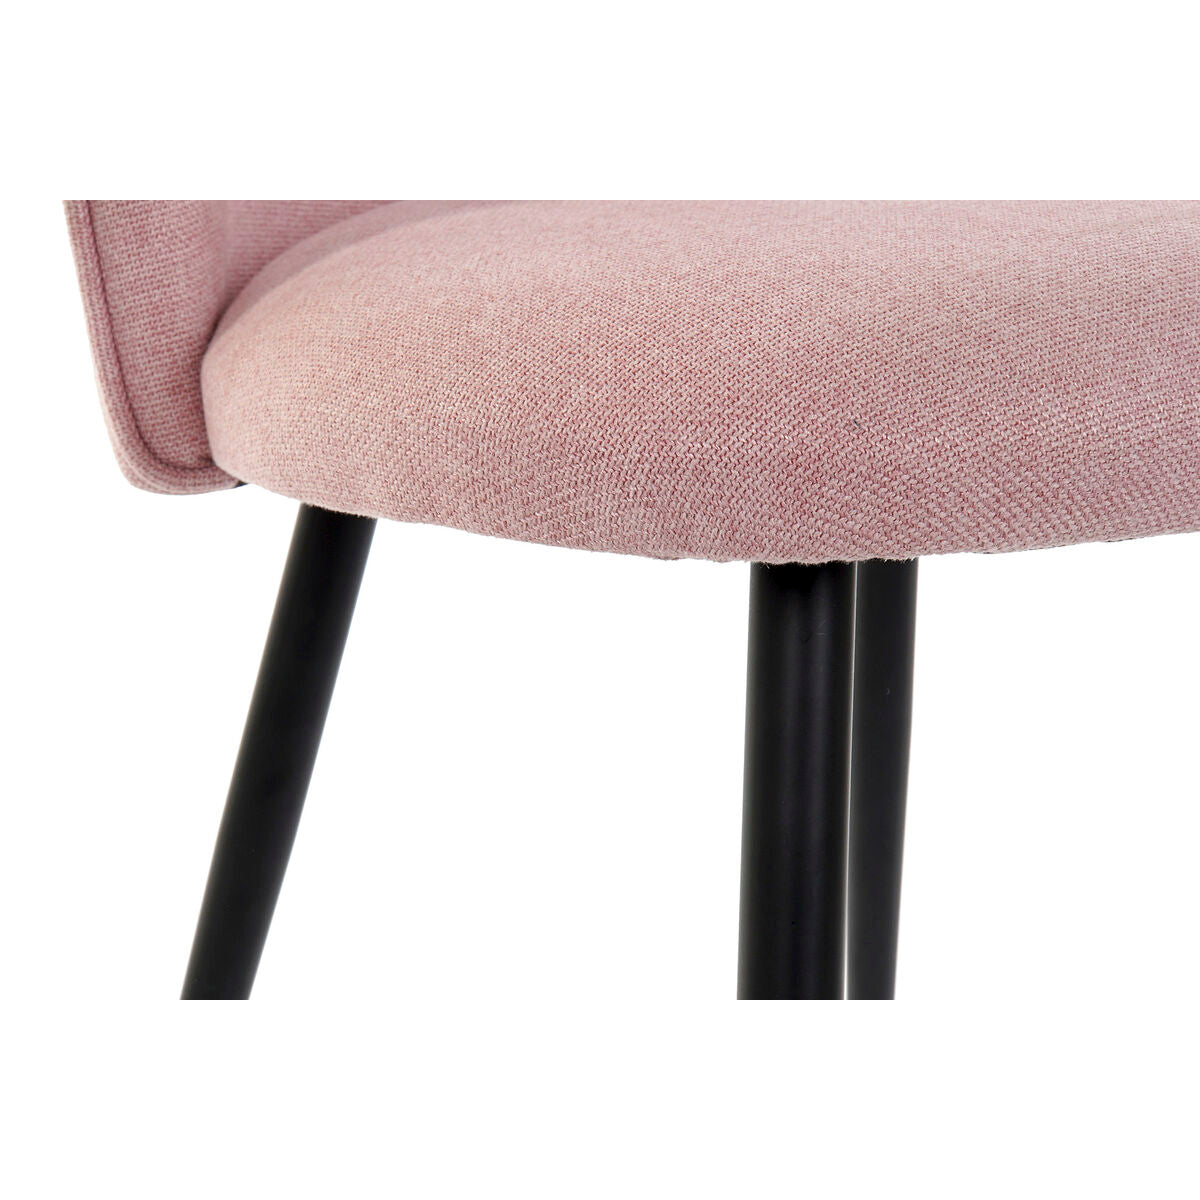 Pink Dining Chair with Black Metal Legs (50 x 52 x 84 cm)